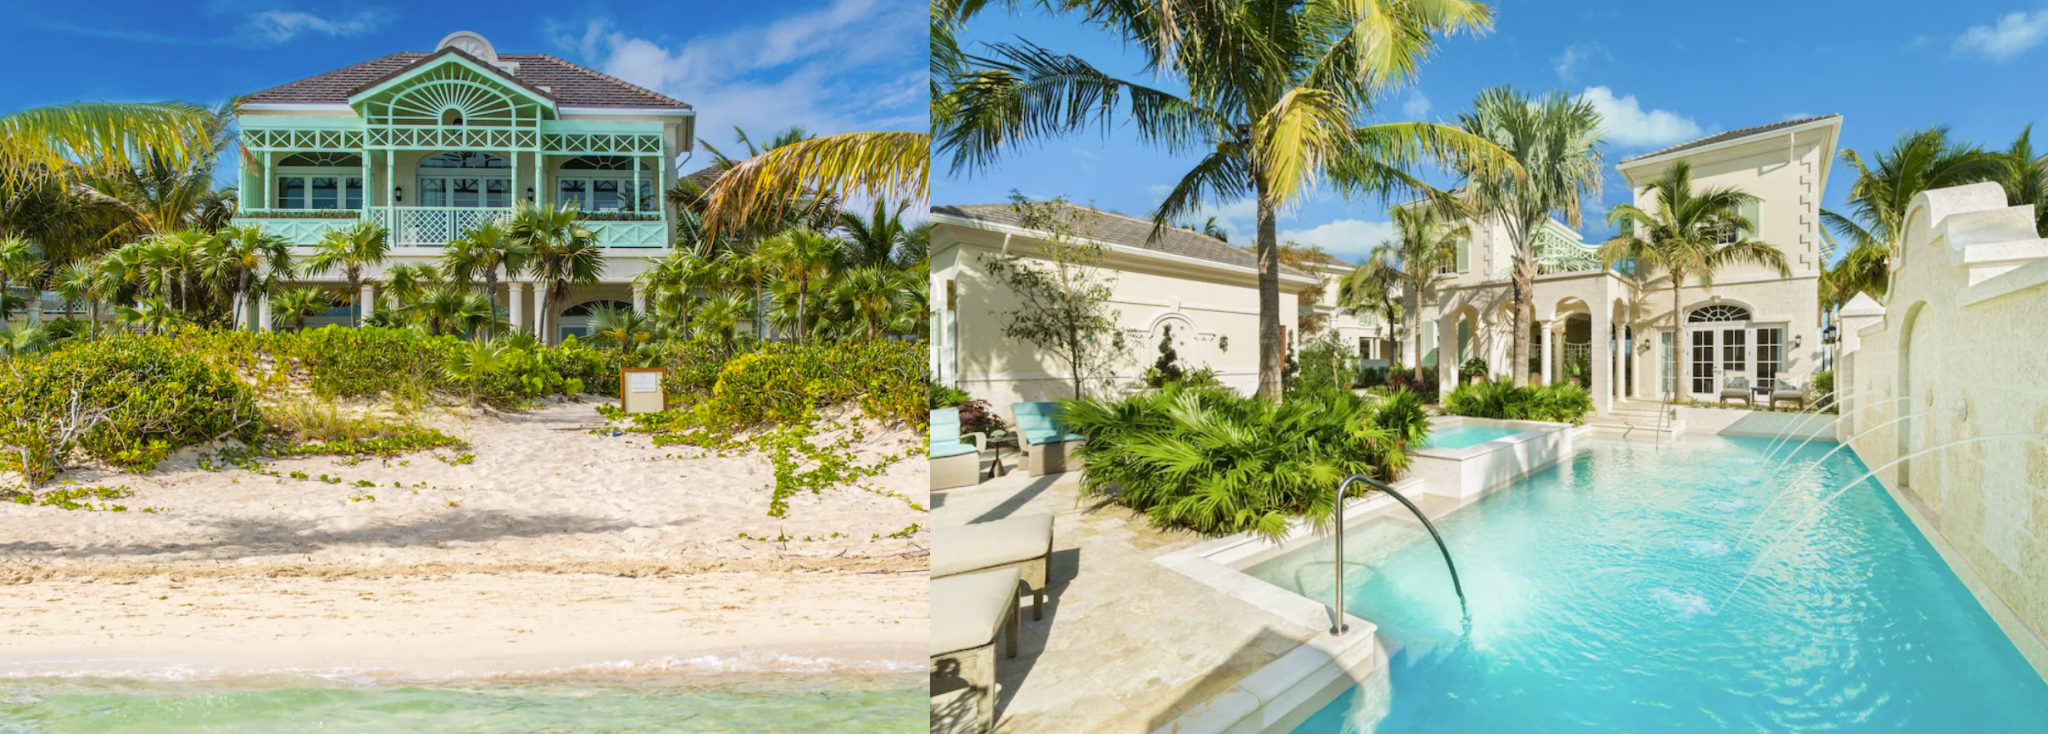 Two images side-by-side show a Turks and Caicos villa for rent. The image of the left is the view of the villa from the shoreline; the house is shaded by tropical trees. The second image shows the luxurious private pool inside the villa.